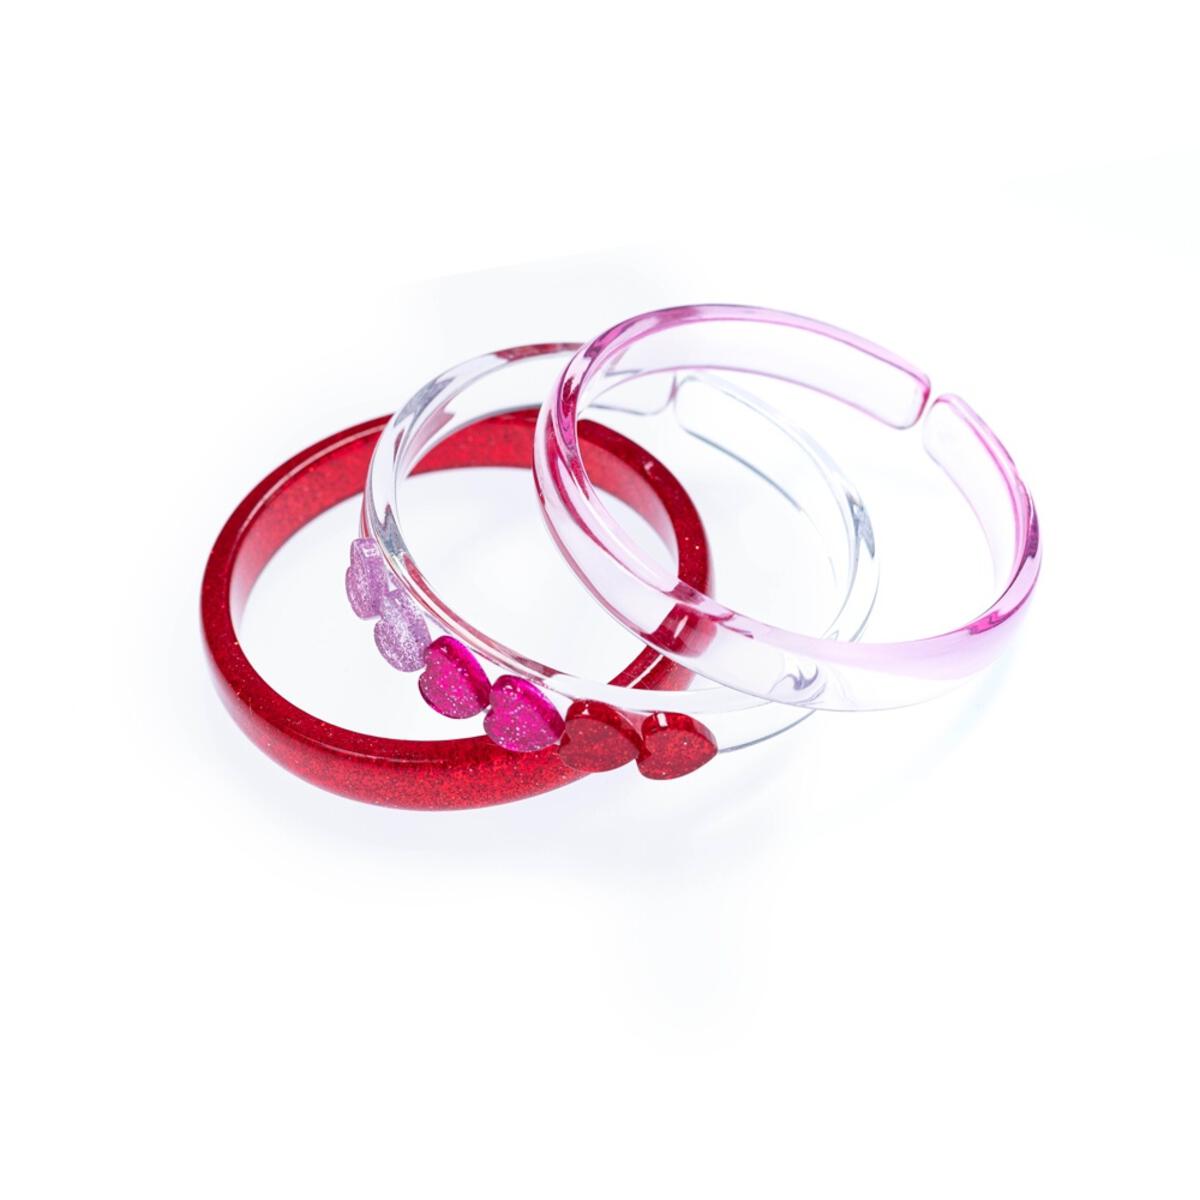 Lilies & Roses Bangles (Set of 3)